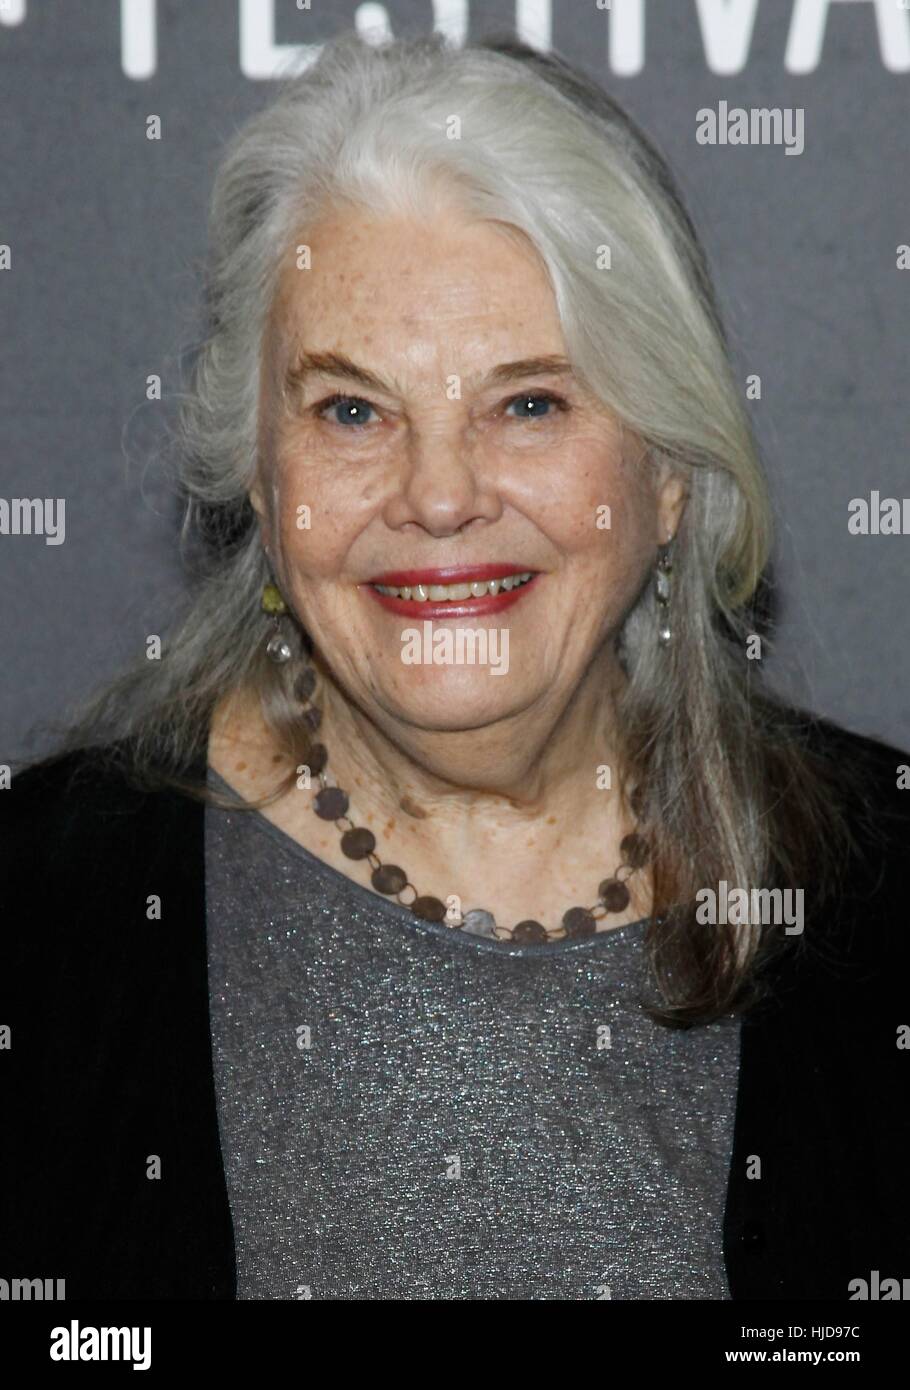 New York, NY, USA. 23rd Jan, 2017. Lois Smith at arrivals for MARJORIE PRIME Premiere at Sundance Film Festival 2017, Eccles Theatre, New York, USA. January 23, 2017. Credit: James Atoa/Everett Collection/Alamy Live News Stock Photo